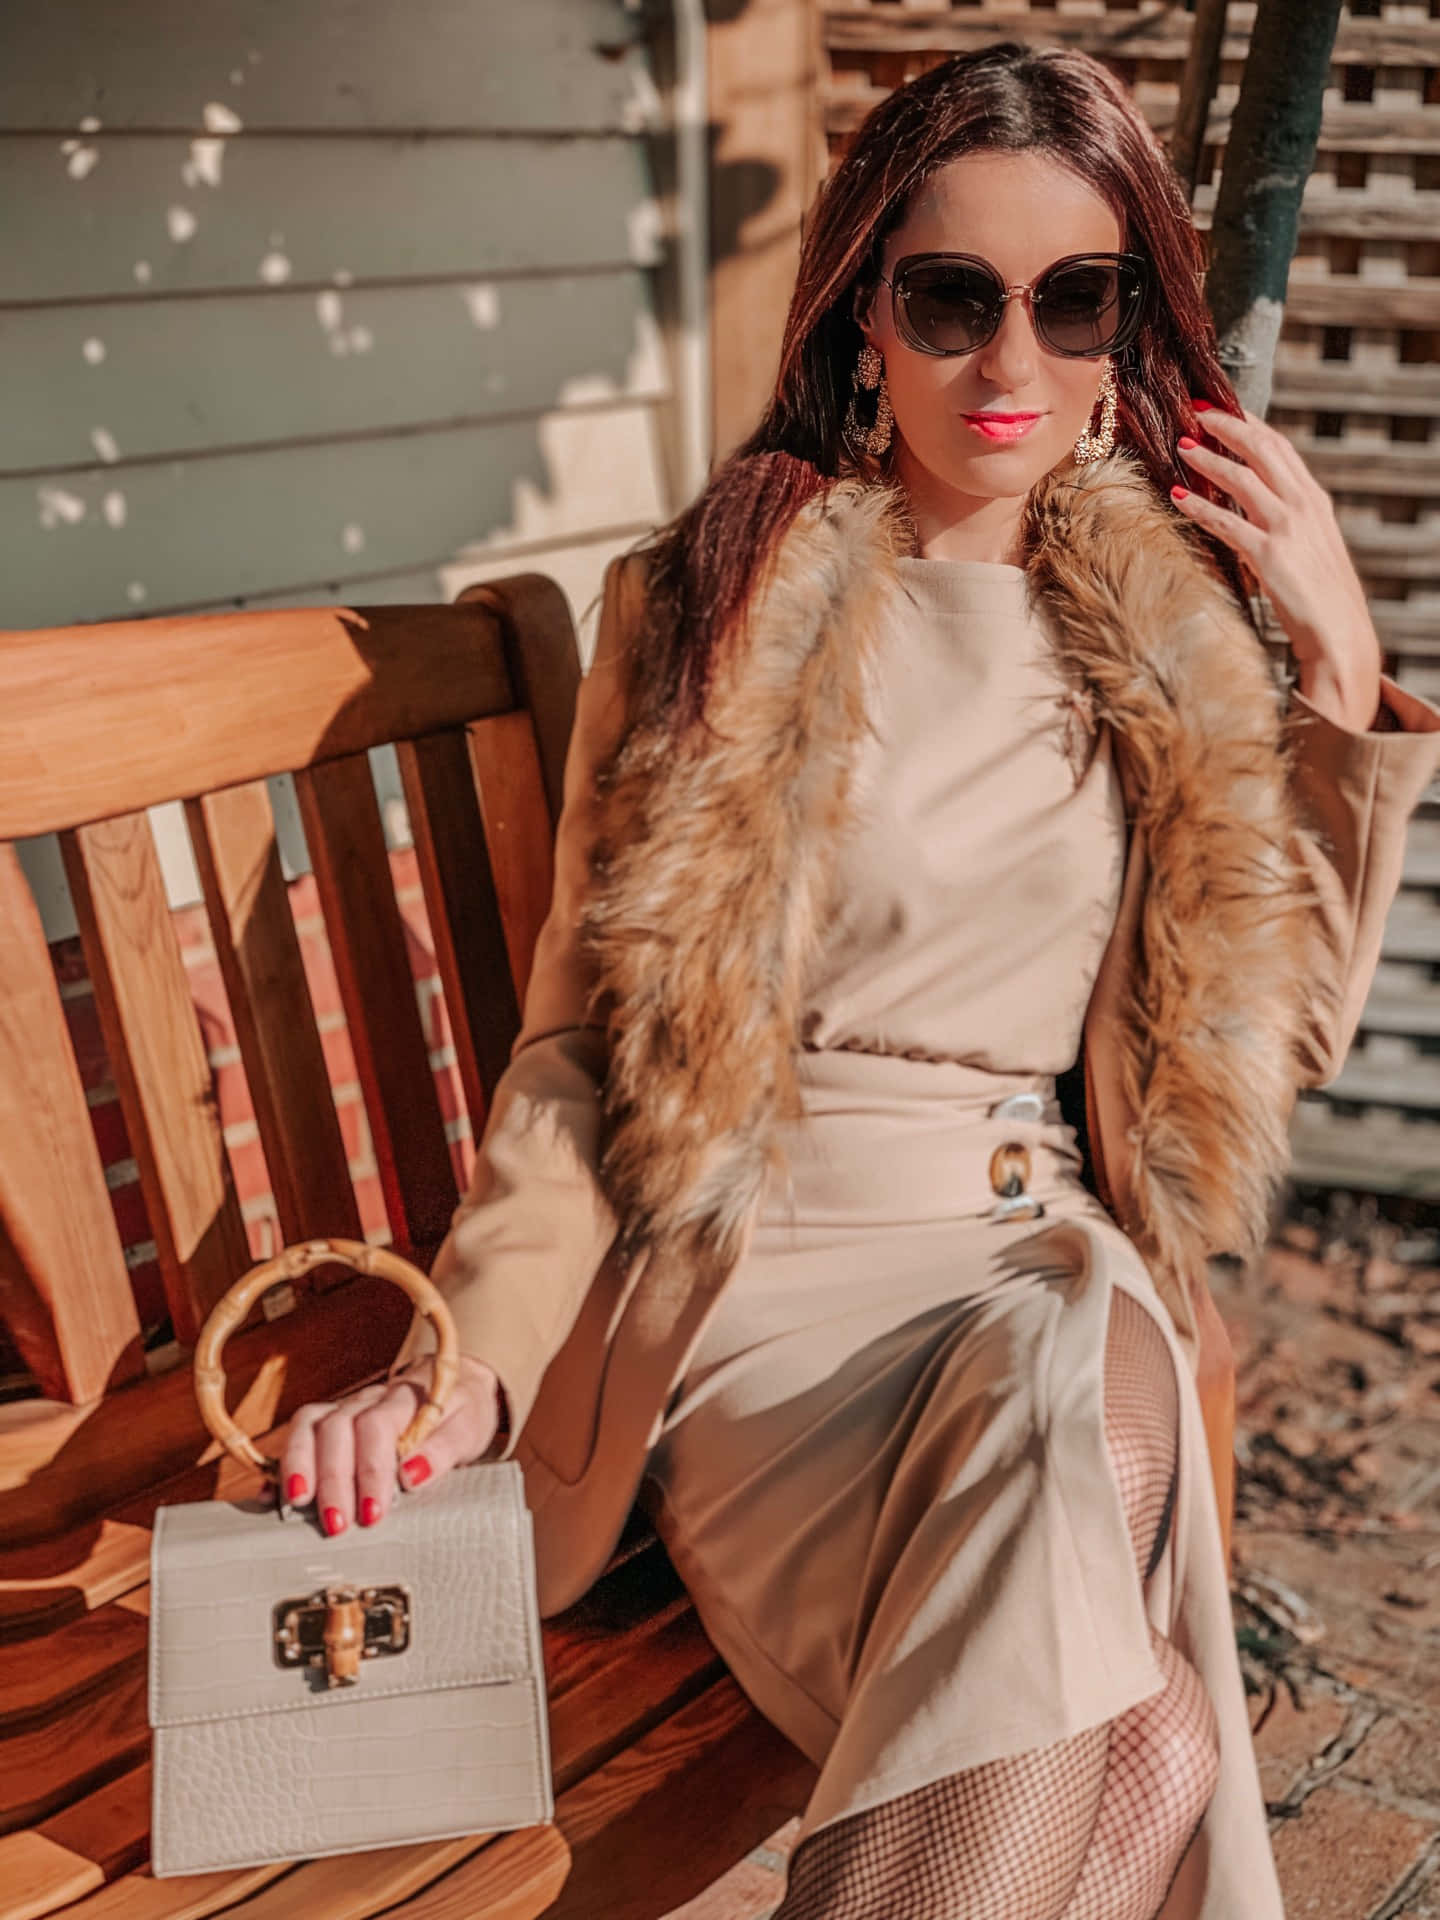 A Woman In A Fur Coat And A Beige Dress Sitting On A Bench